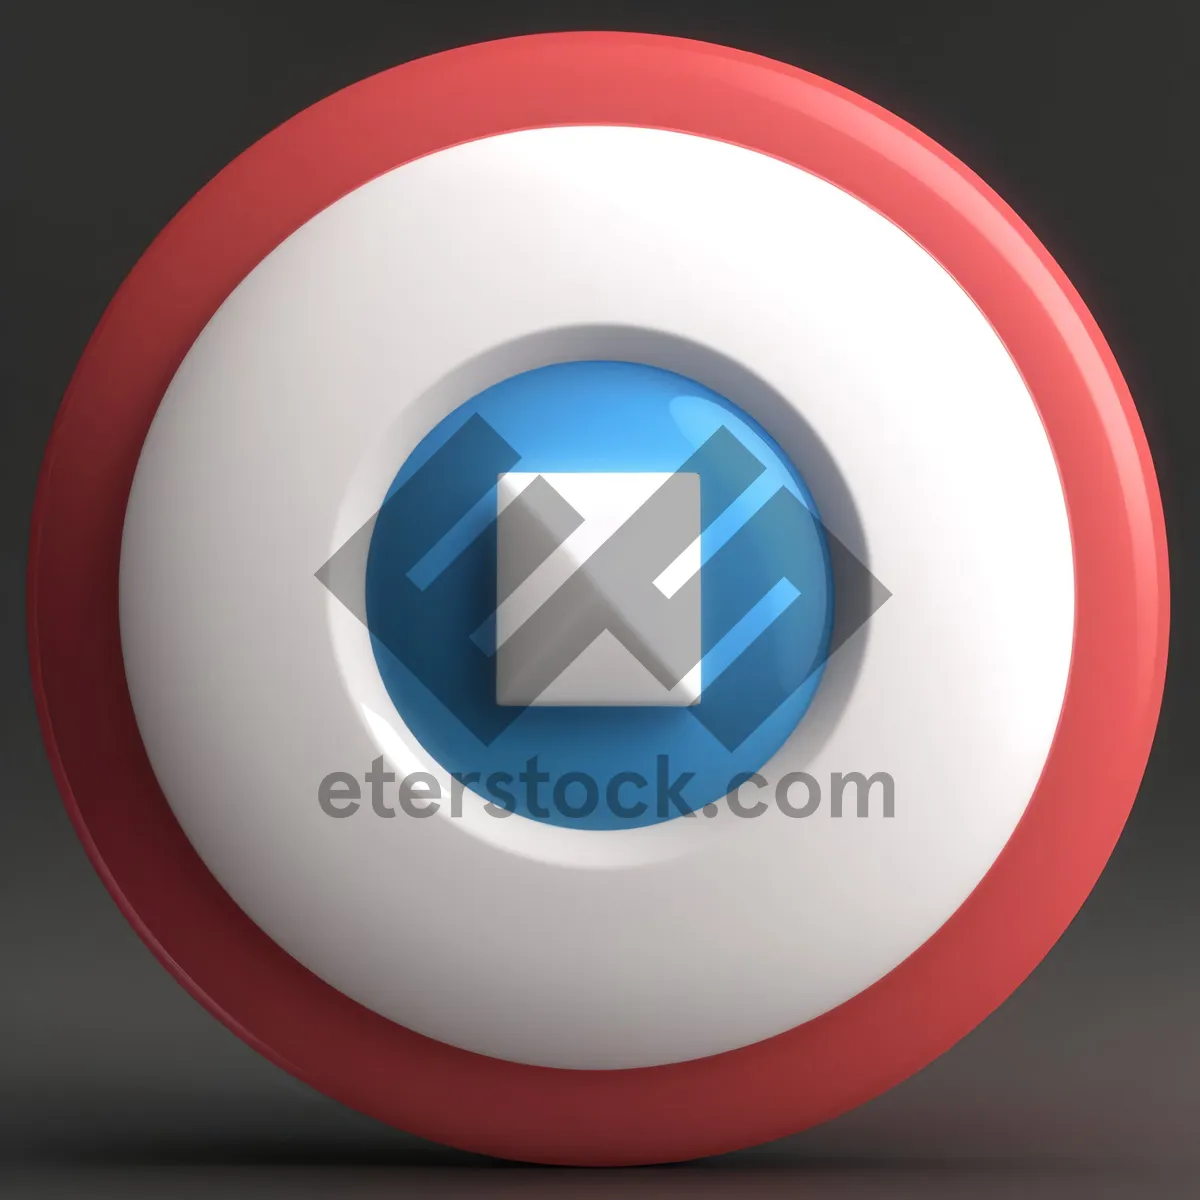 Picture of Glossy Round Metallic Web Button Icon